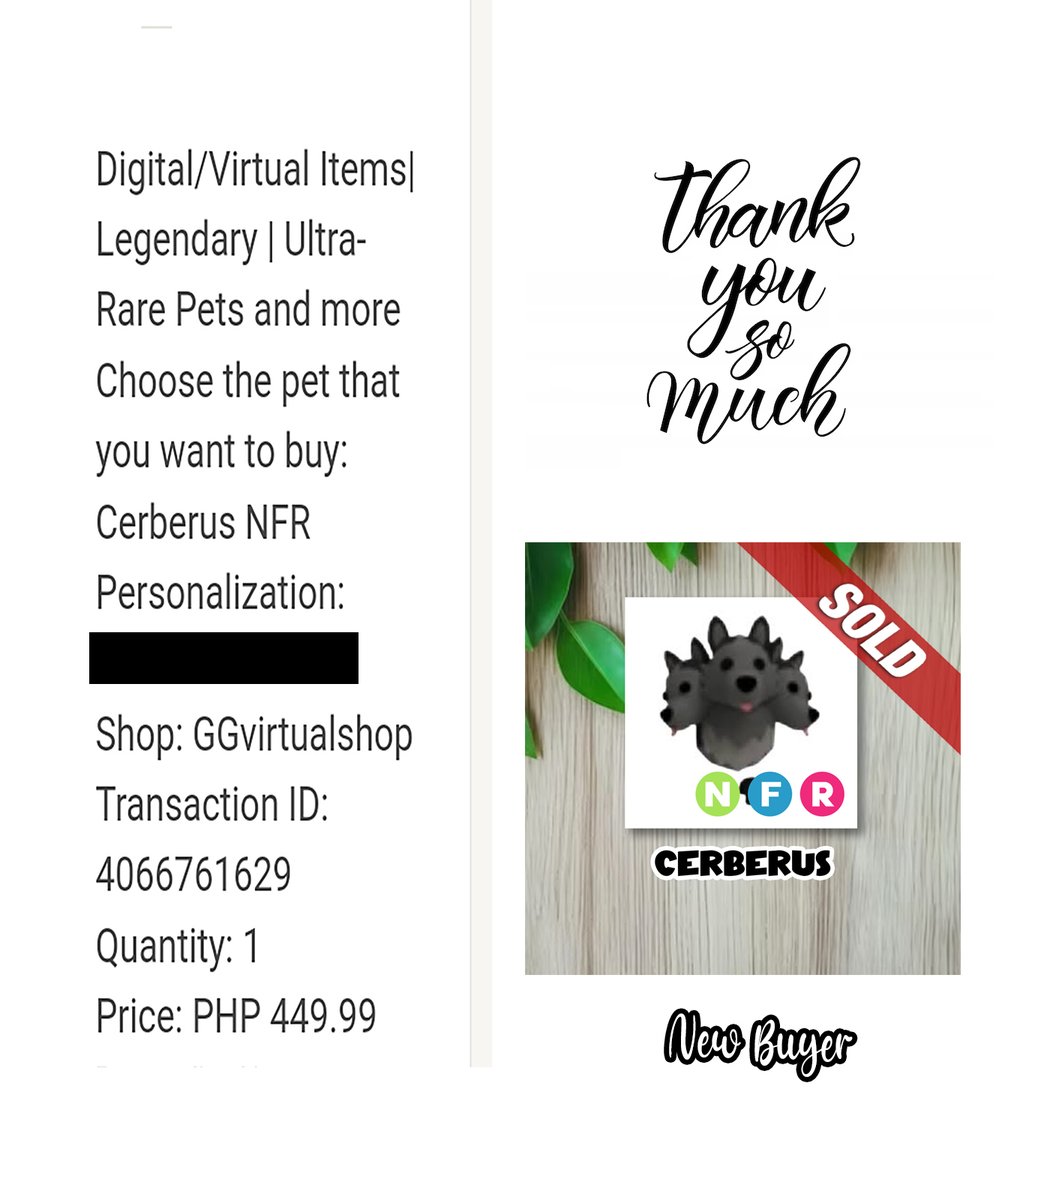 3⃣7⃣ NFR Cerberus was SOLD to our NEW BUYER thank you so much for trusting & ordering to our shop😇

#Adoptmetrade #adoptmetrading #adoptme #adoptmeselling #adoptmeoffers #adoptmegiveaways #adoptmegw #adoptmeshop #adoptmeseller #ROBLOX #robloxadoptme #trustedshop #ggvirtualshop